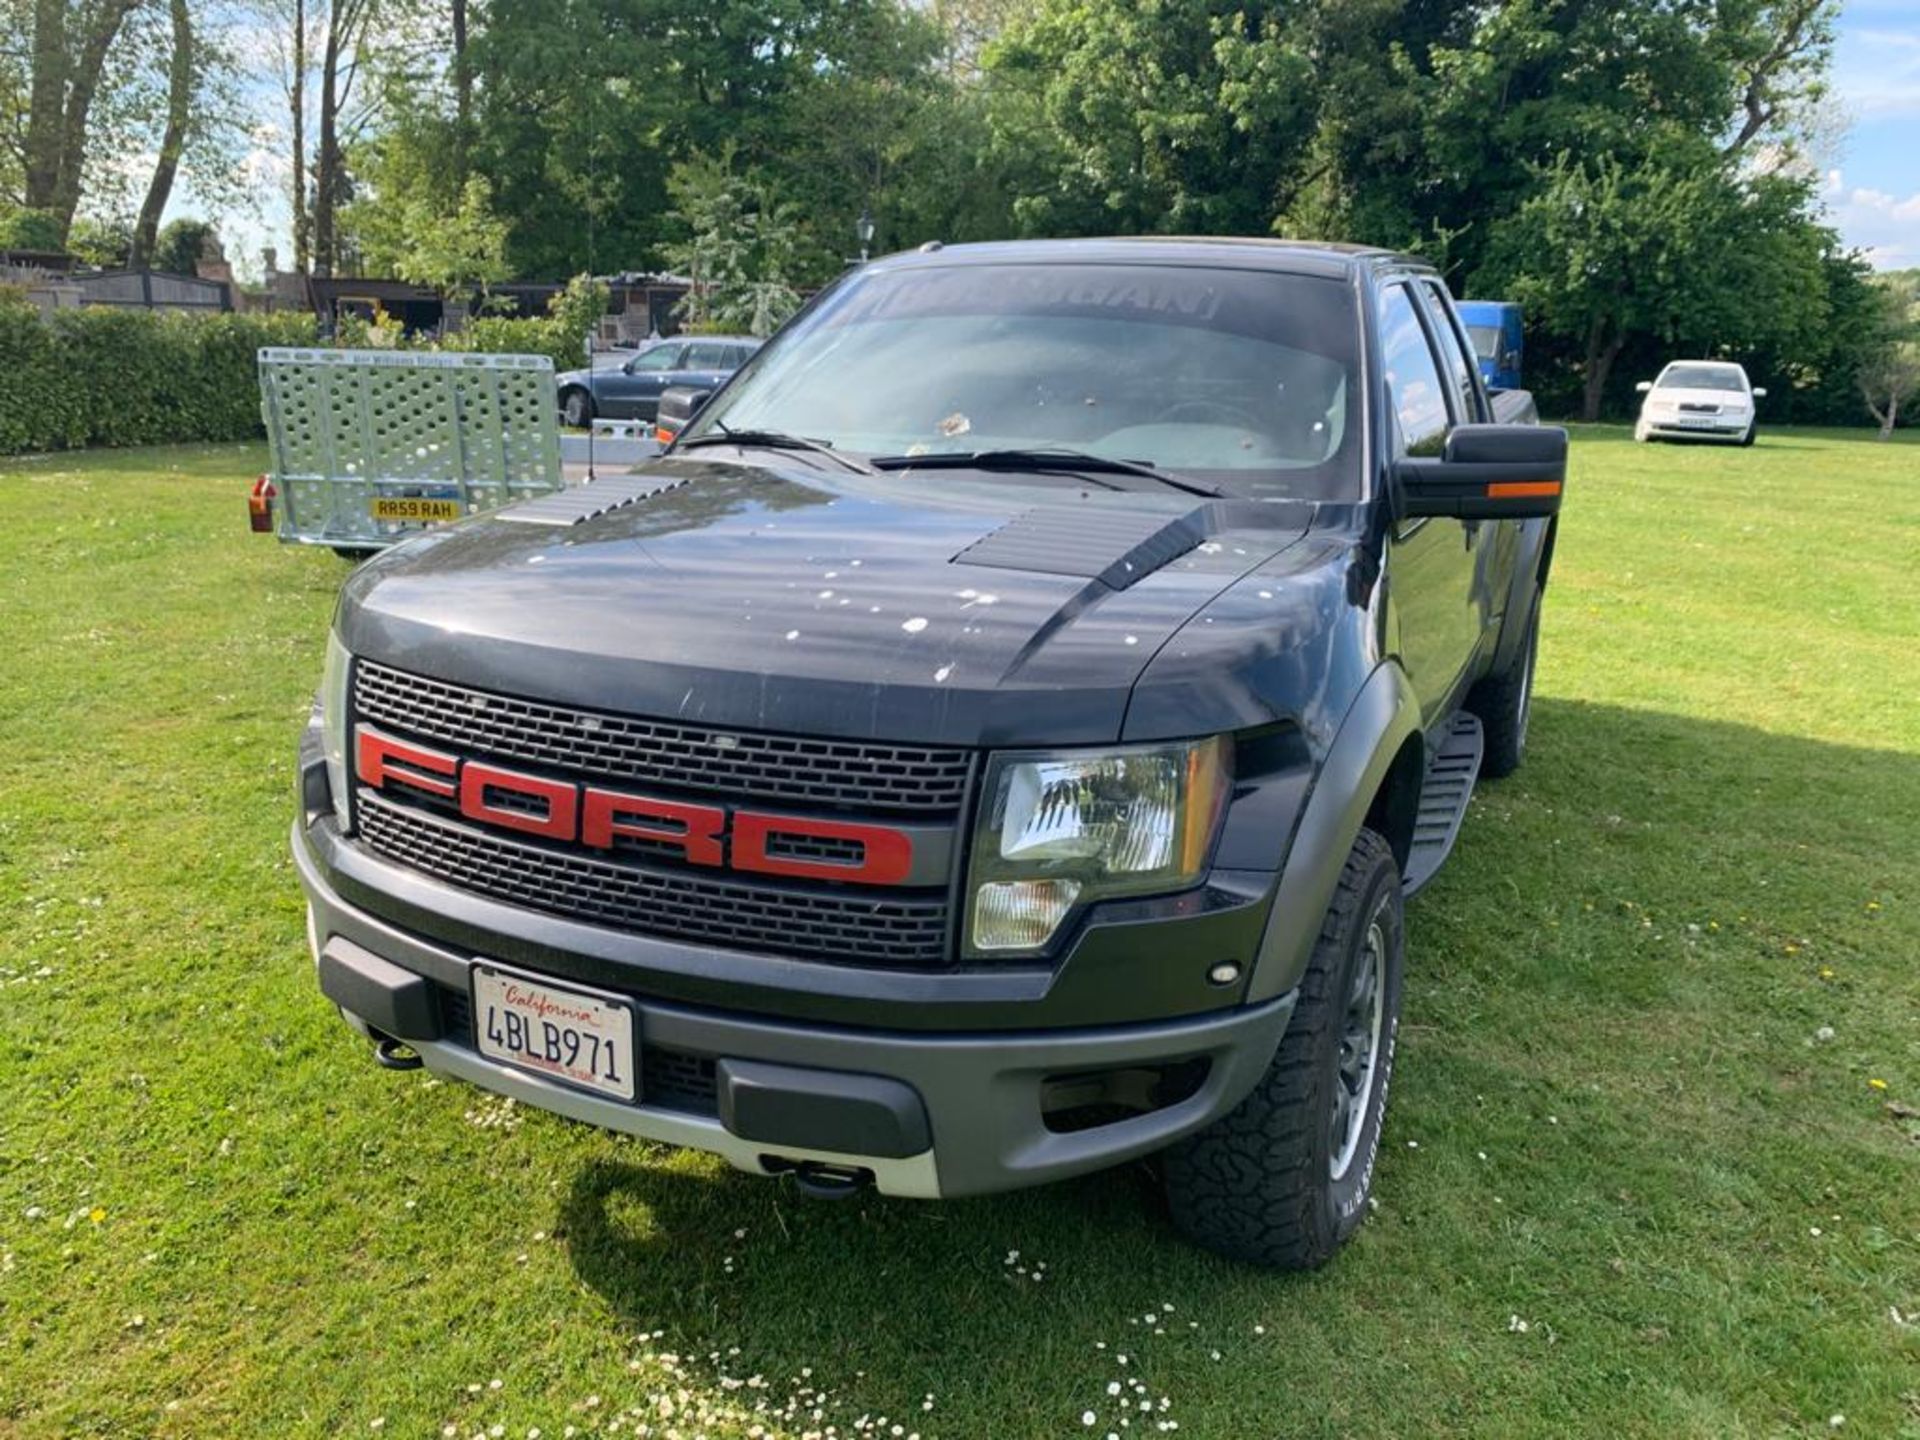 2012 FORD F-150 RAPTOR - 65,000 MILES, LOTS OF UPGRADED PARTS, READY IN UK WITH NOVA APPLICATION